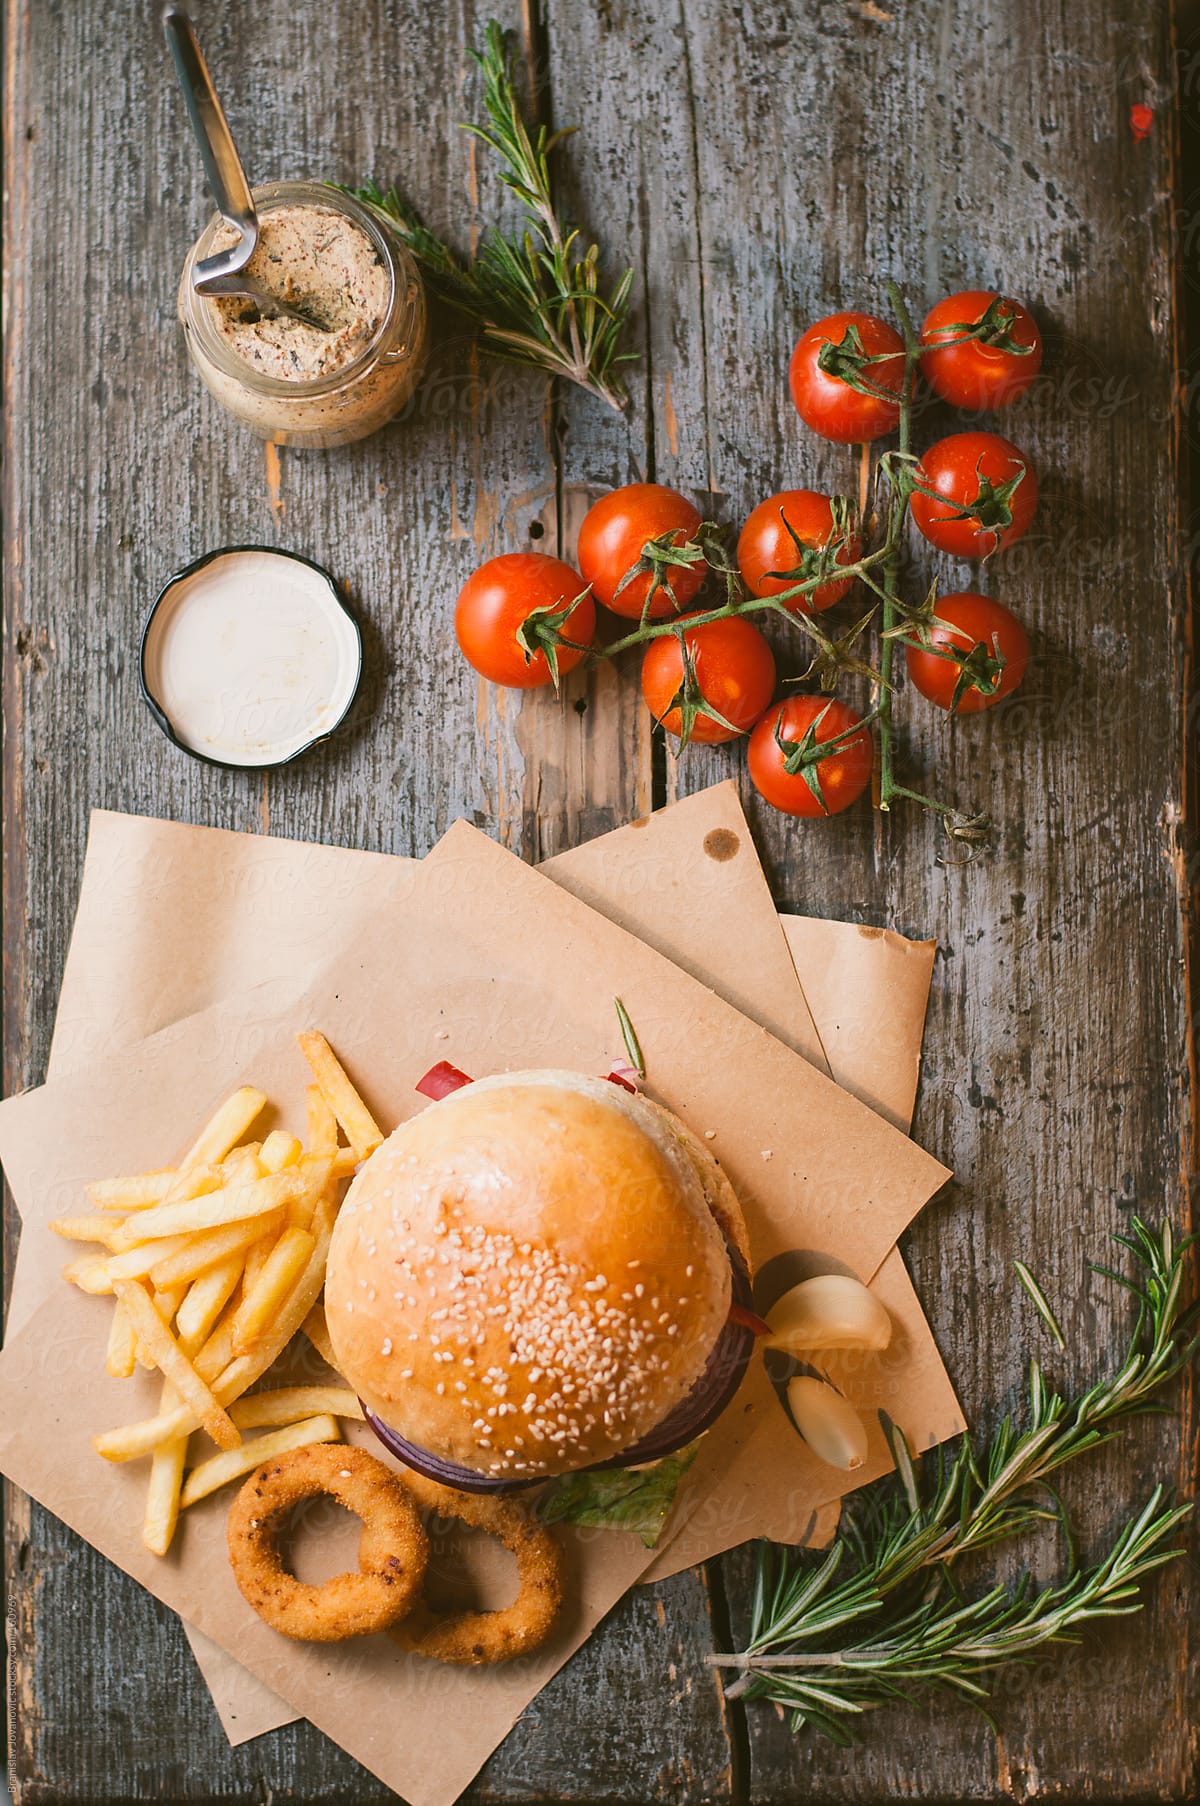 Beef Burger With Fries And Cherry Tomotoes